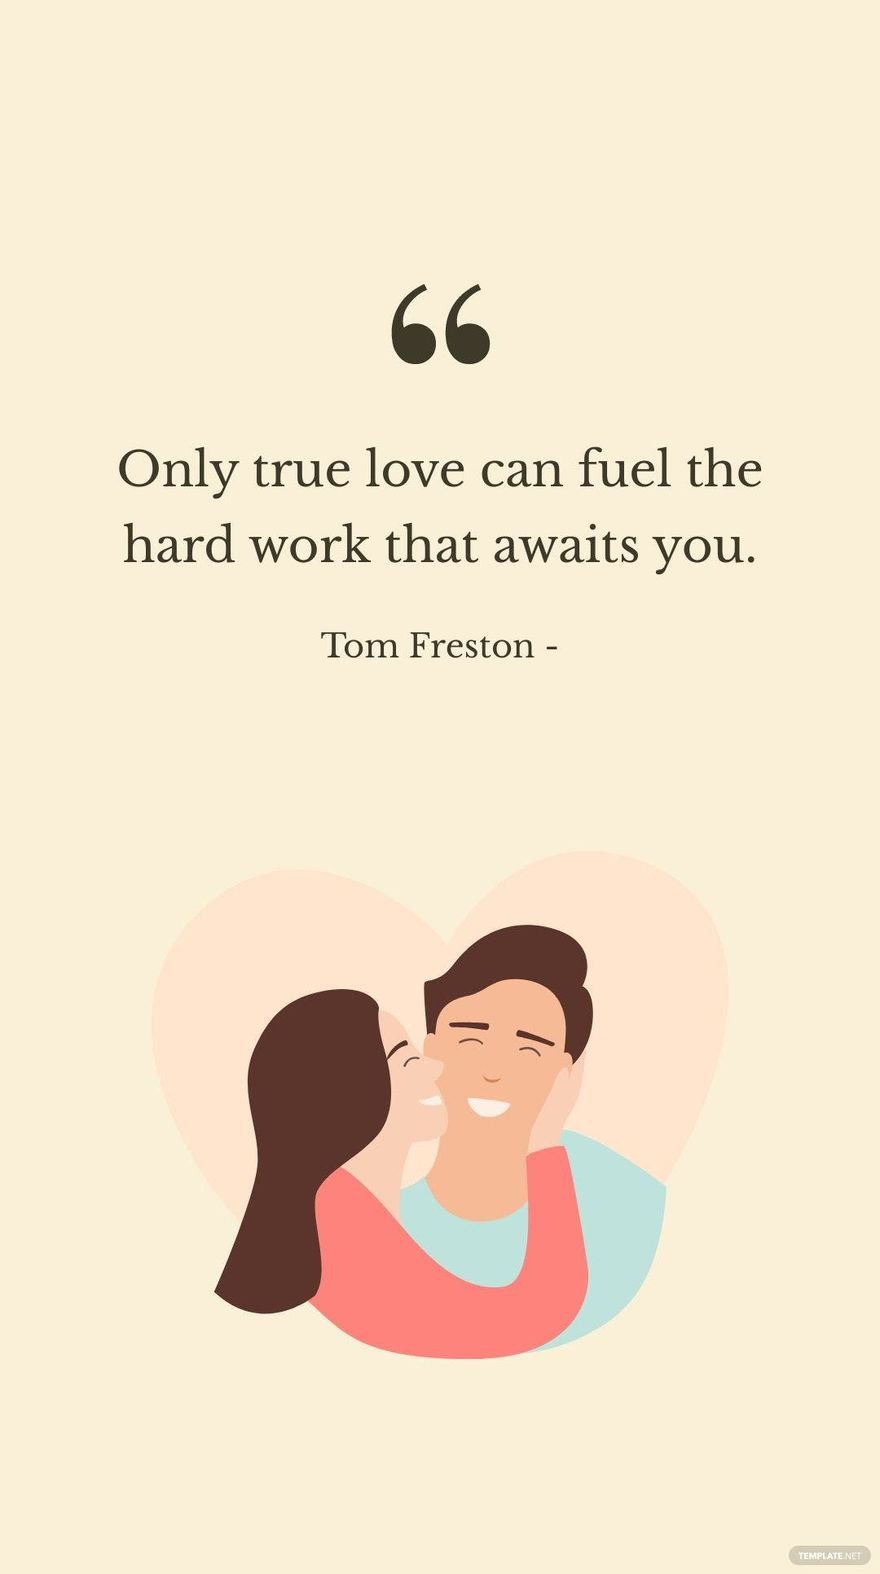 Tom Freston - Only true love can fuel the hard work that awaits you.